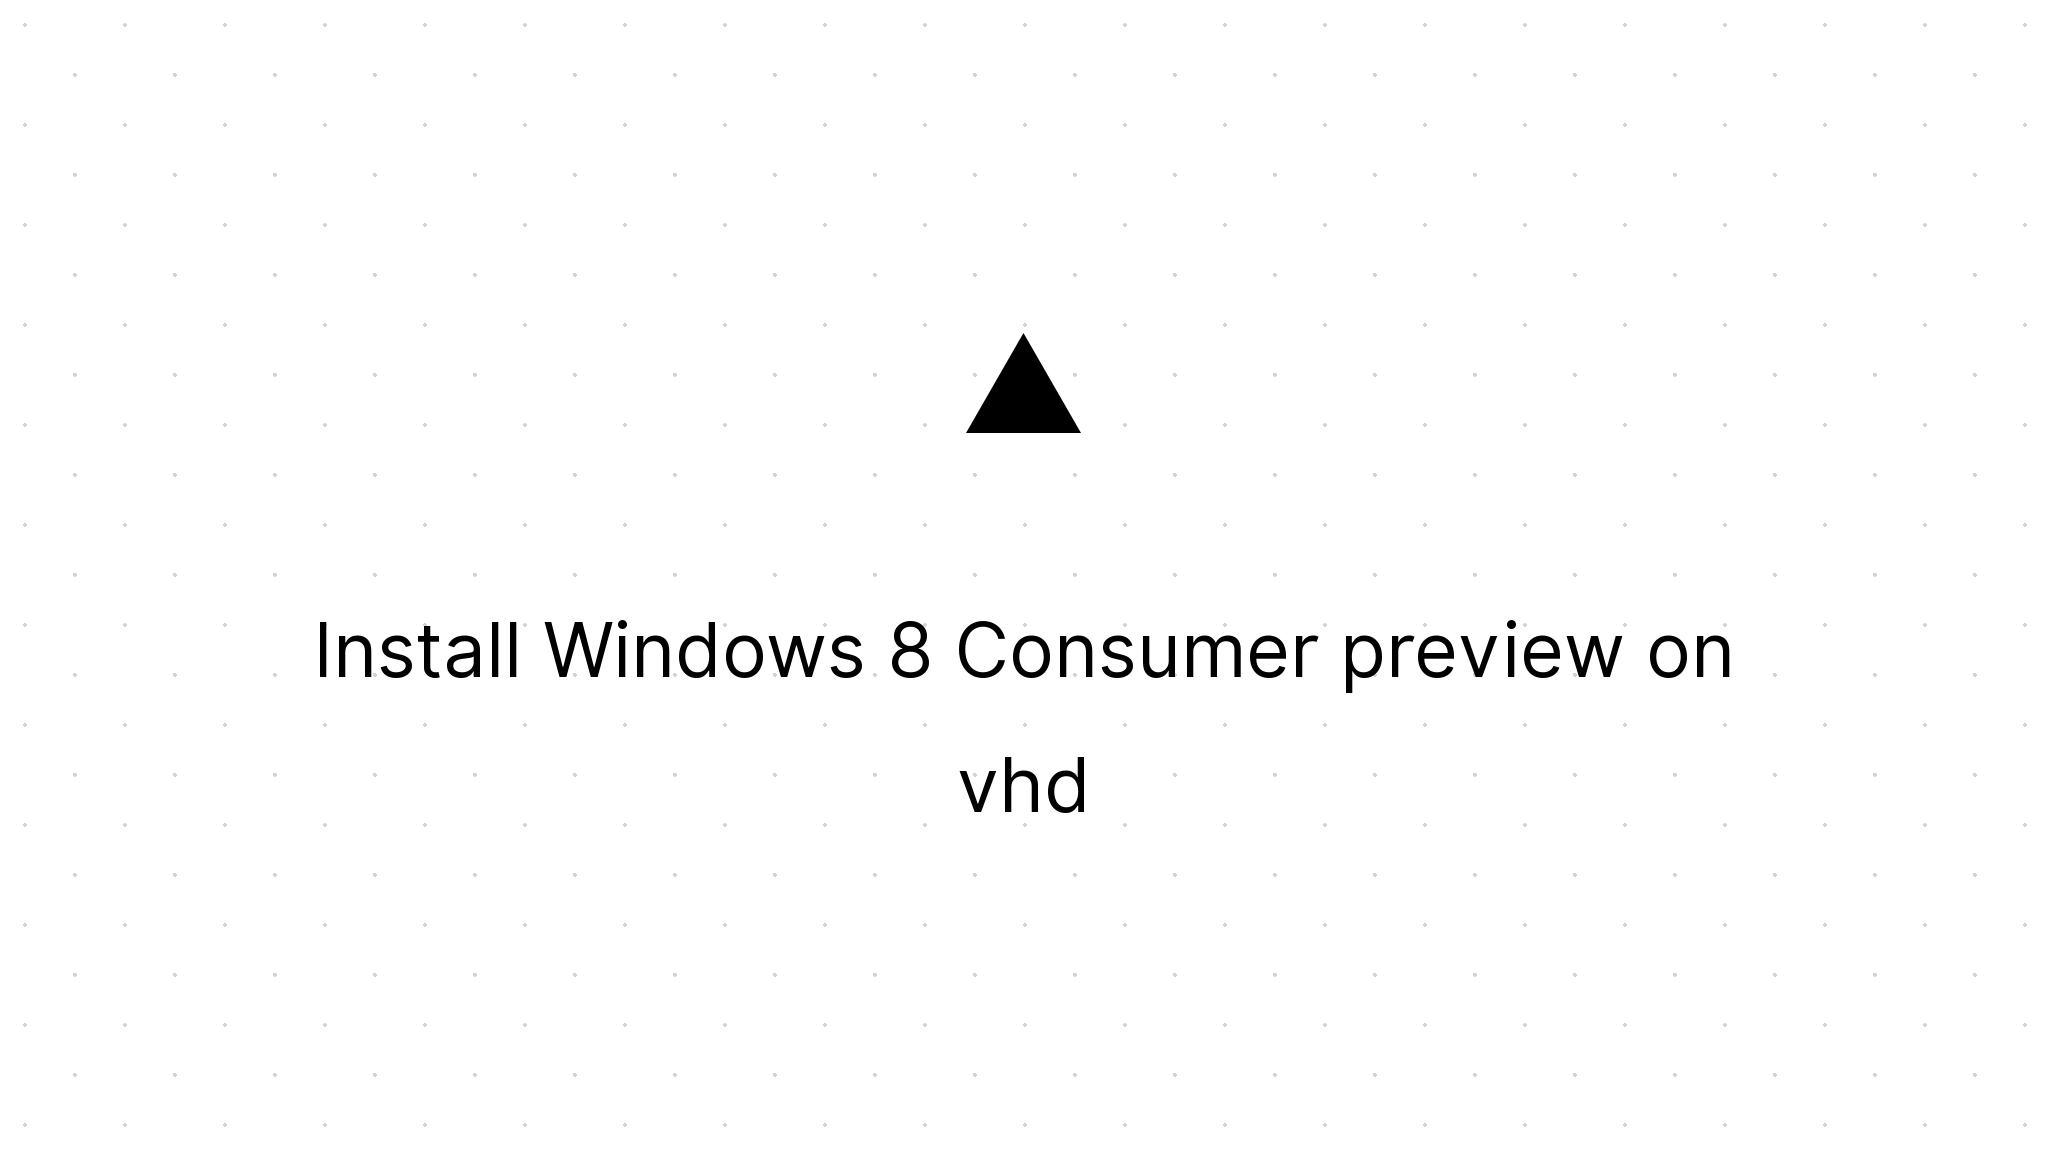 Cover Image for Install Windows 8 Consumer preview on vhd